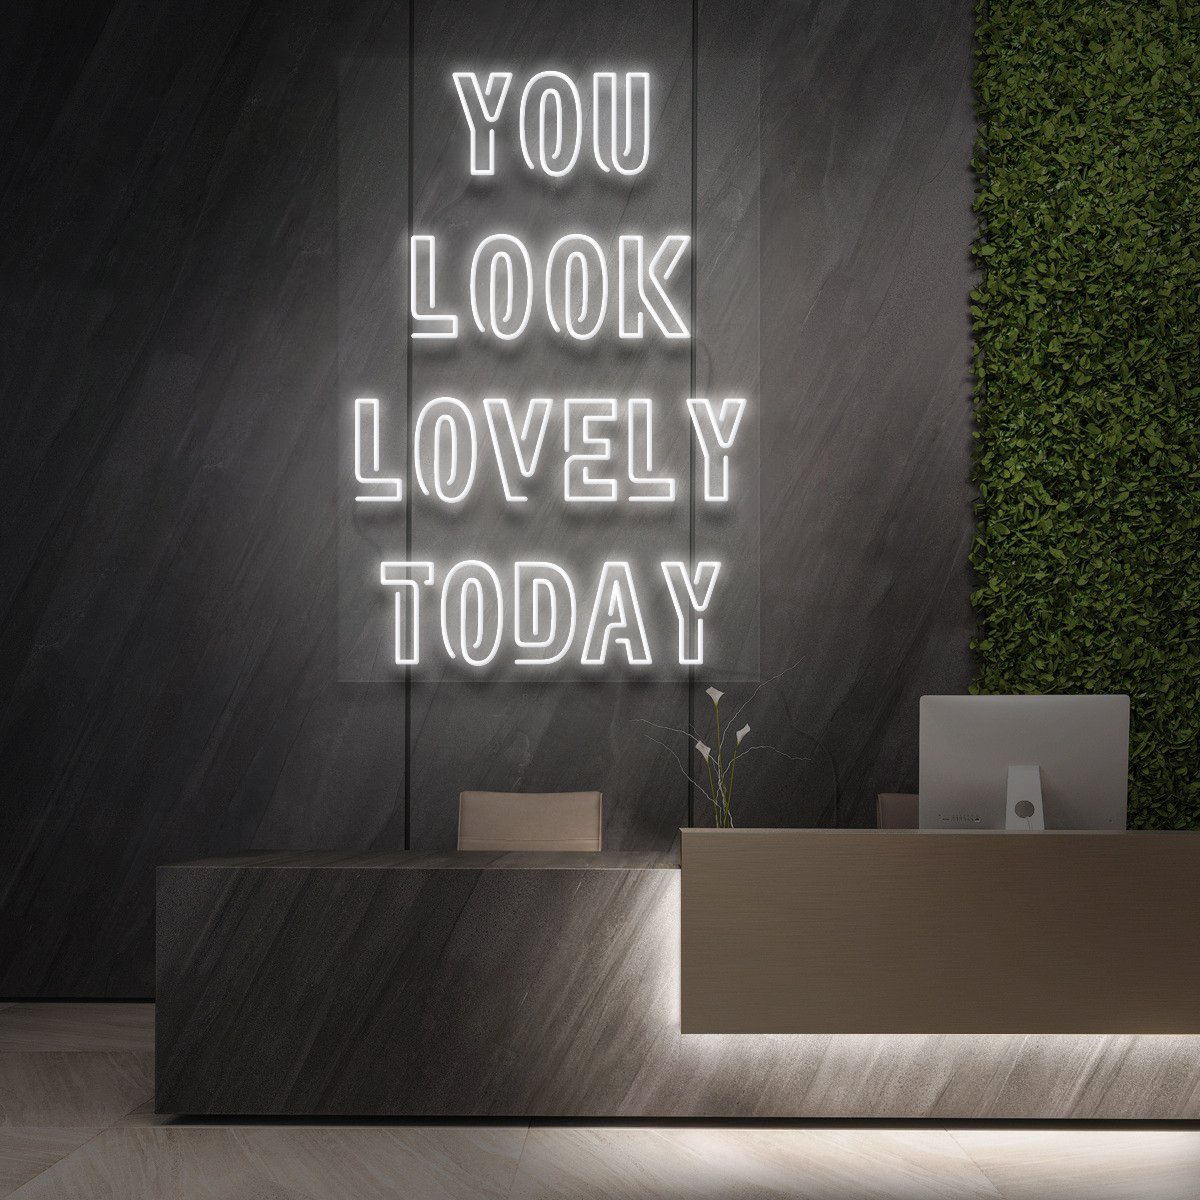 "You Look Lovely Today" Neon Sign for Beauty & Cosmetic Studios